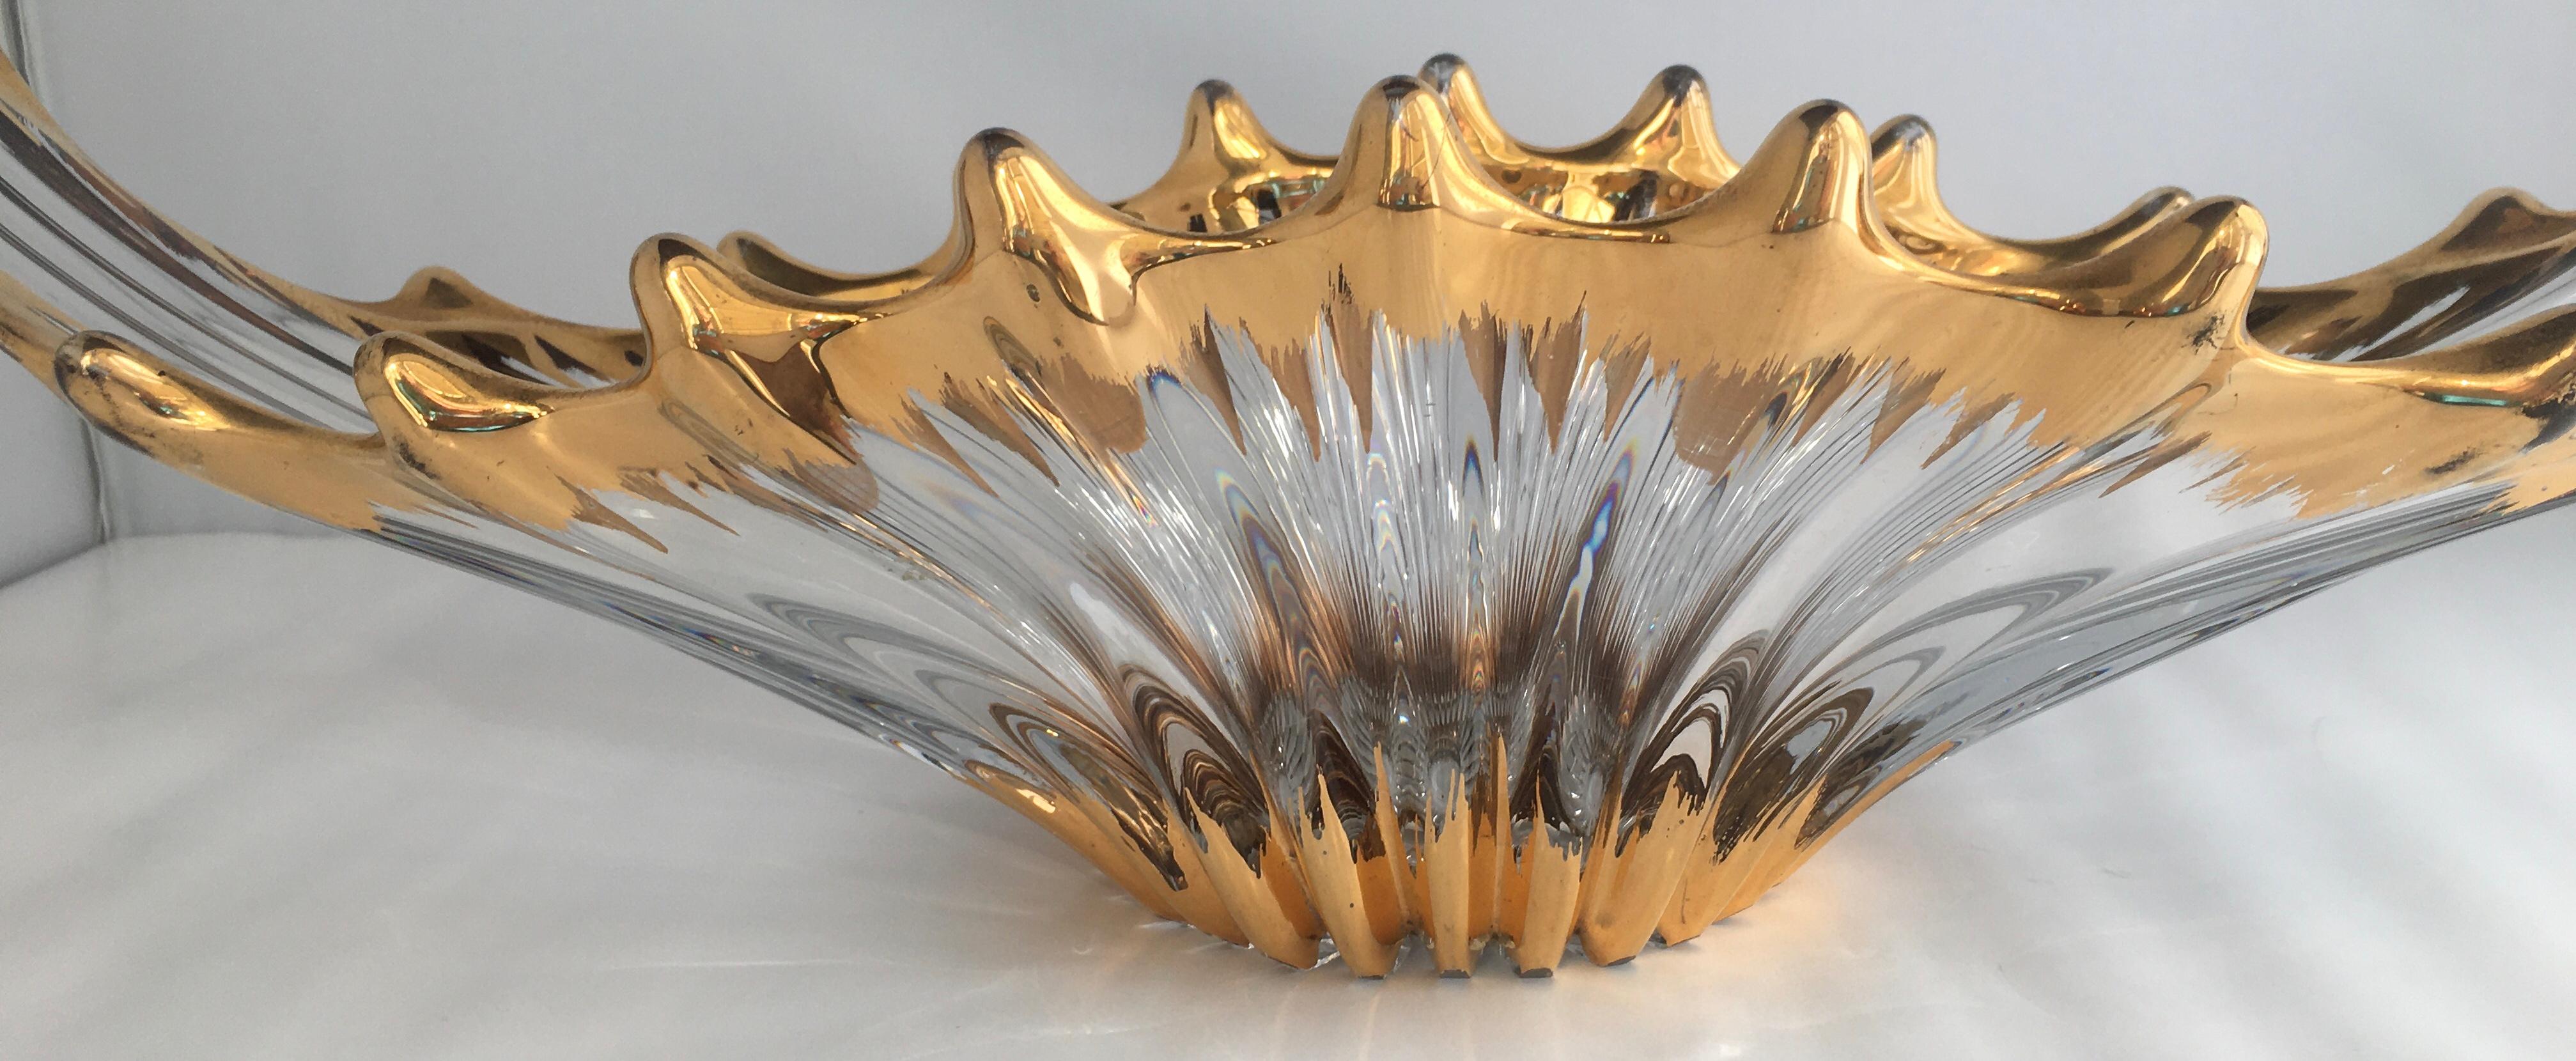 Gorgeous art glass centerpiece with great details. This beautiful handcrafted item has a fluid, freeform shape. Heavy gold, ridge and swirl design, clear. 

Cofrac Art Verrier France, unmarked. 
Handcrafted, no two pieces by the maker are the same.